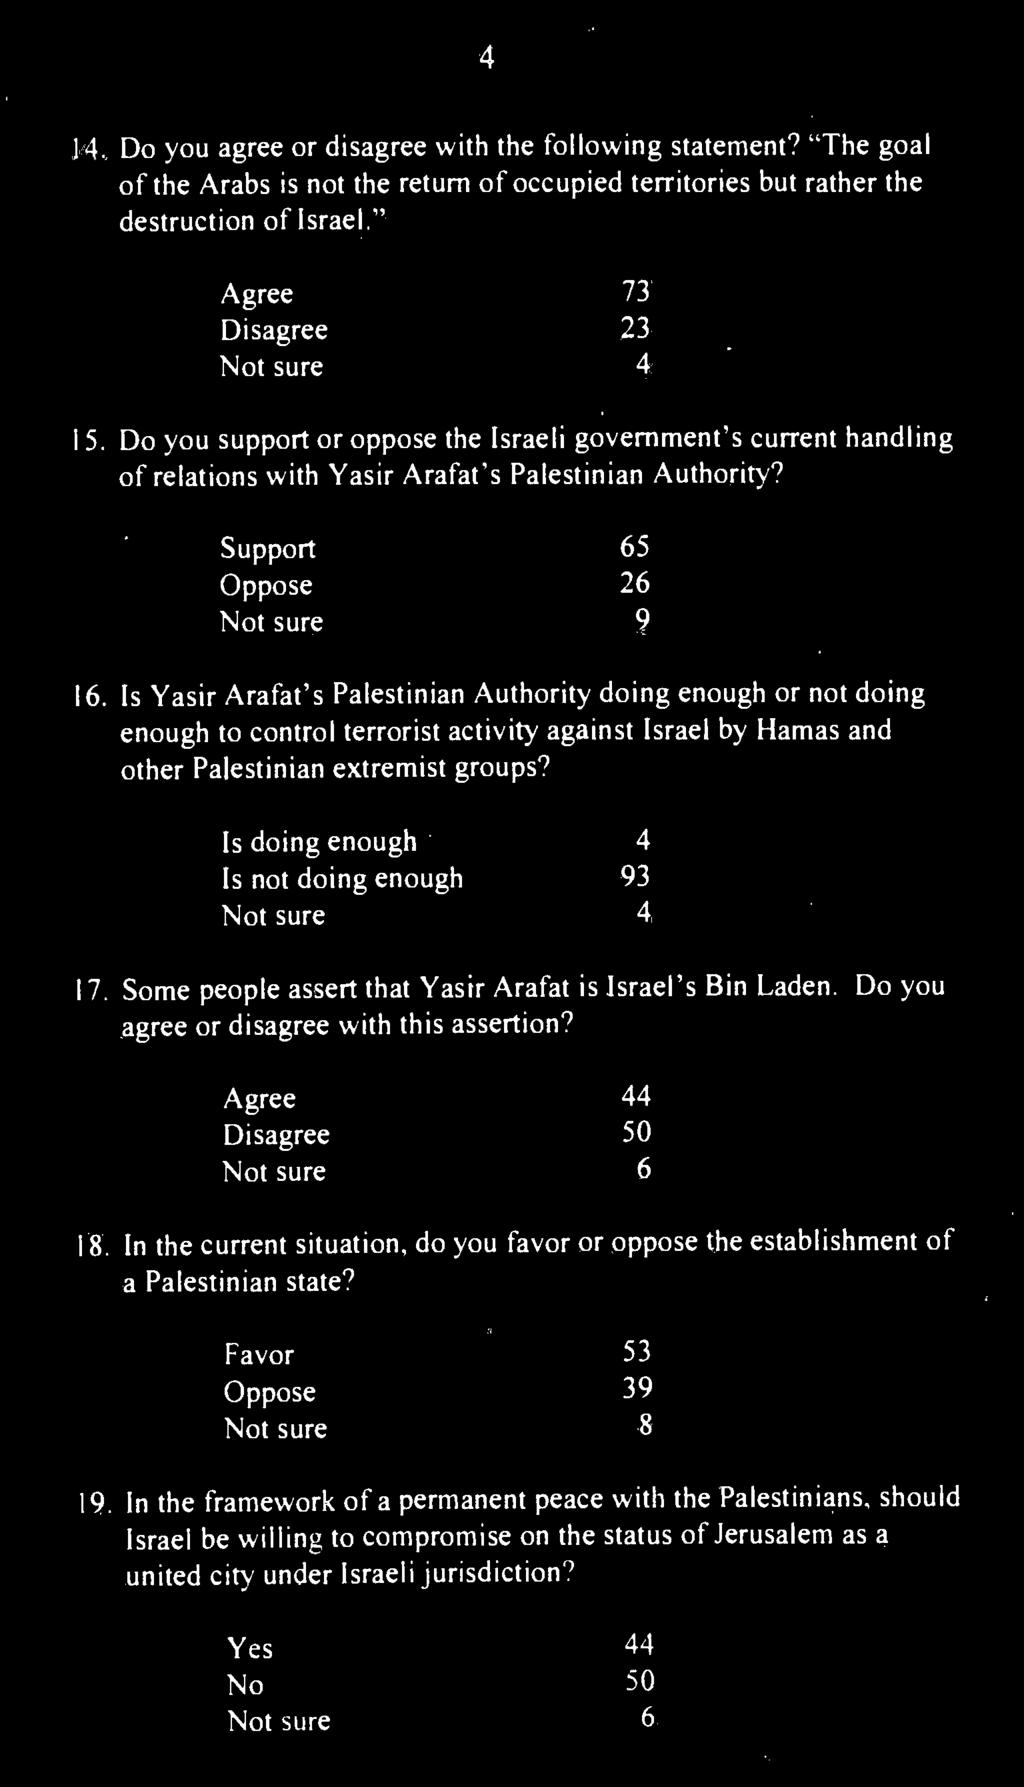 4 14. Do you agree or disagree with the following statement? "The goal of the Arabs is not the return of occupied territories but rather the destruction of Israel." Agree 73 Disagree 23 Not sure 4 15.